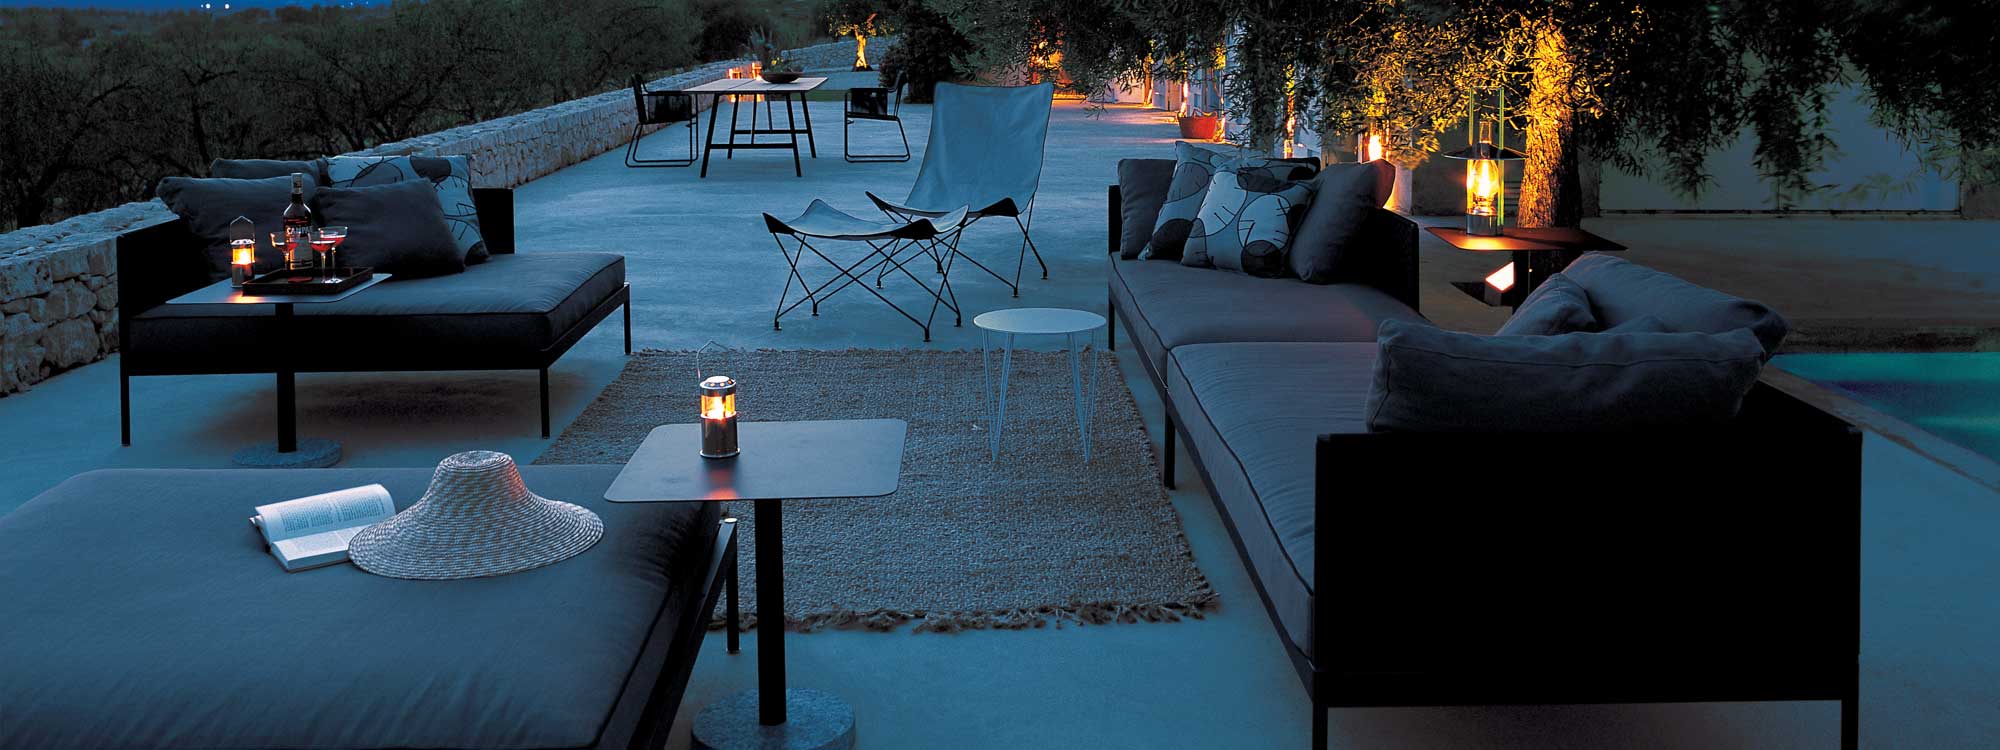 Image of RODA Basket outdoor sofa and daybed on terrace at dusk, with Lawrence butterfly chair and Harp dining chairs in background